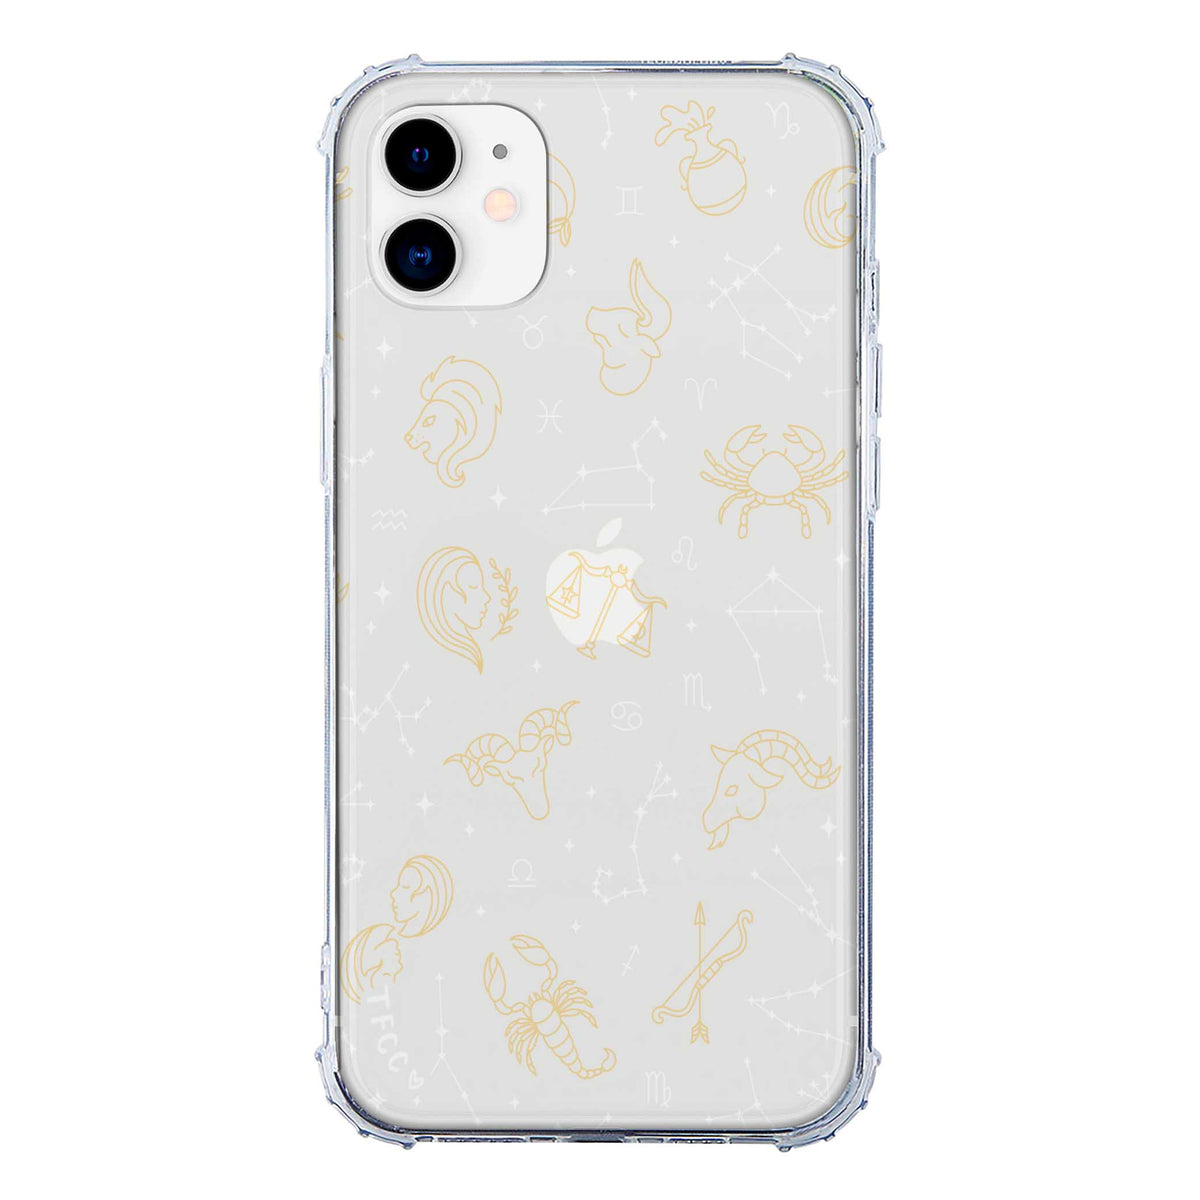 STAR SIGN CLEAR CASE - thefonecasecompany